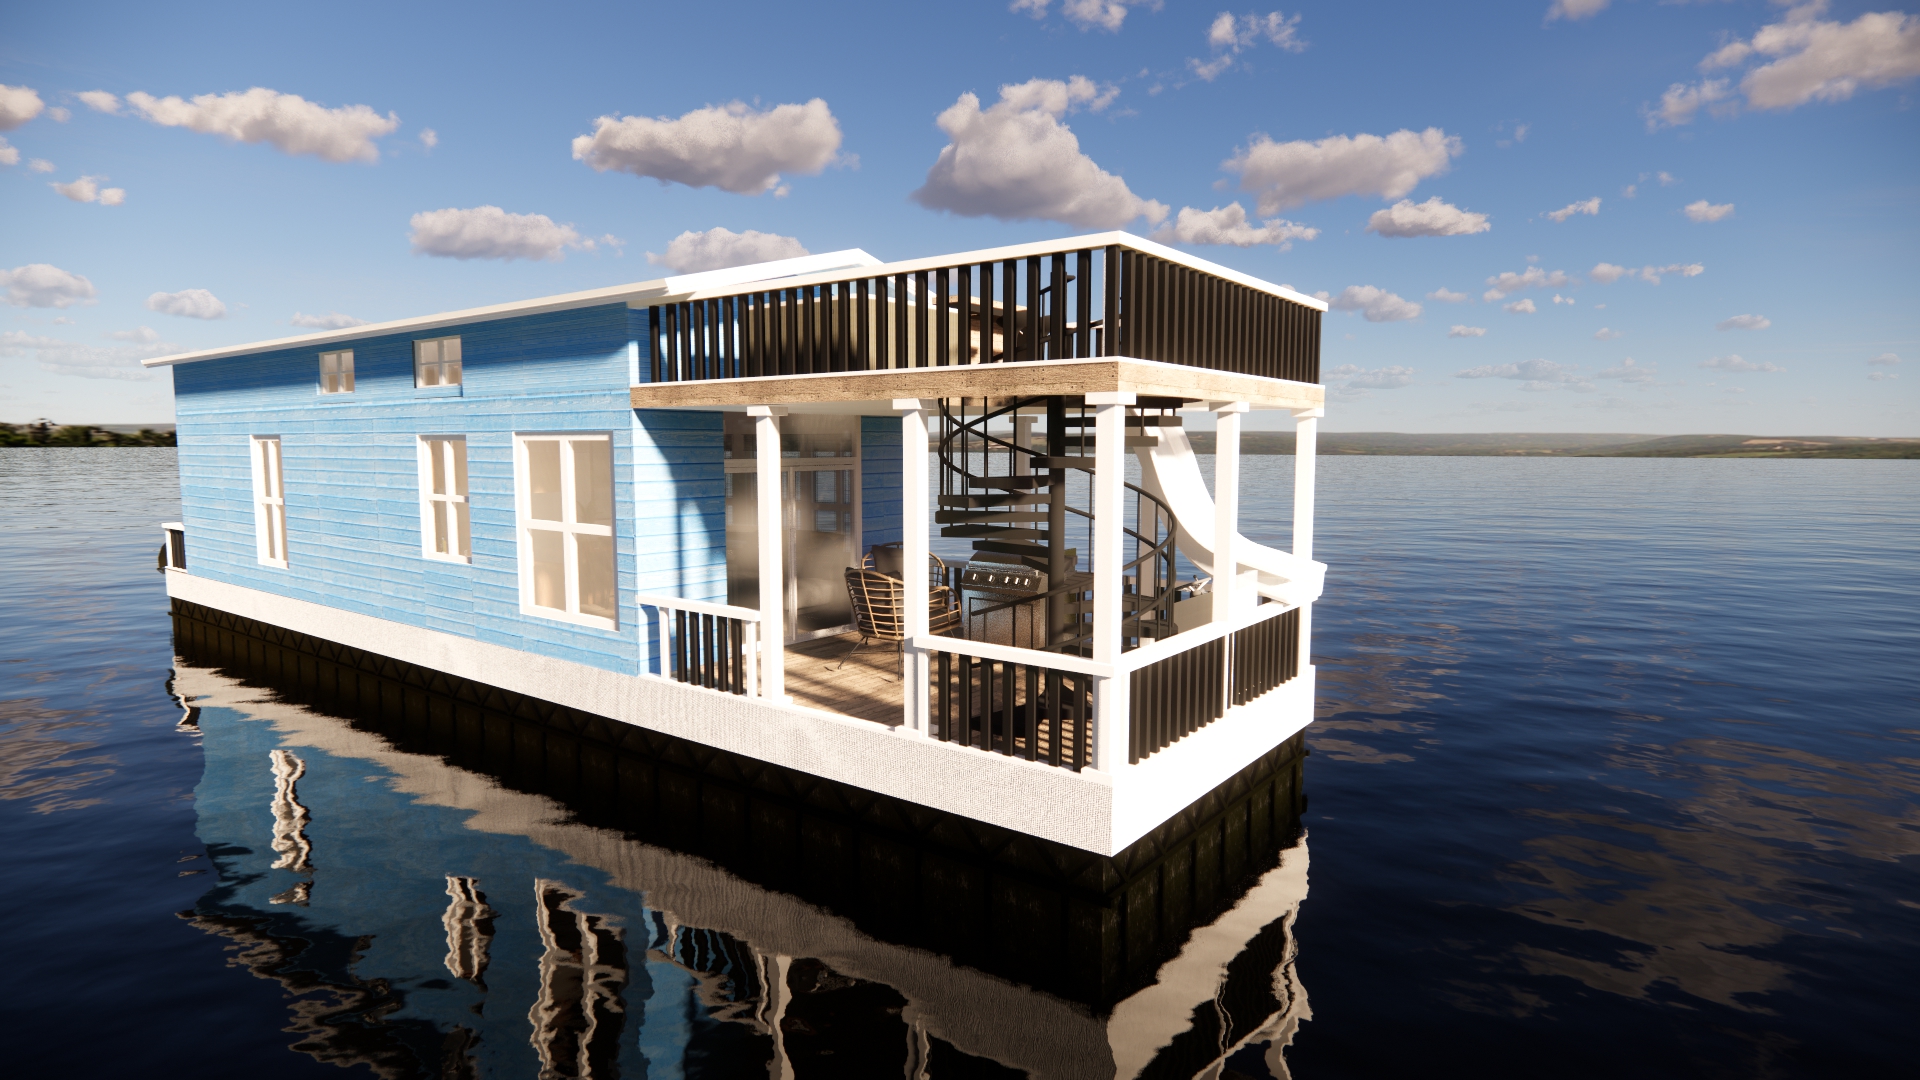 The American Houseboat-The Grand Canyon Model